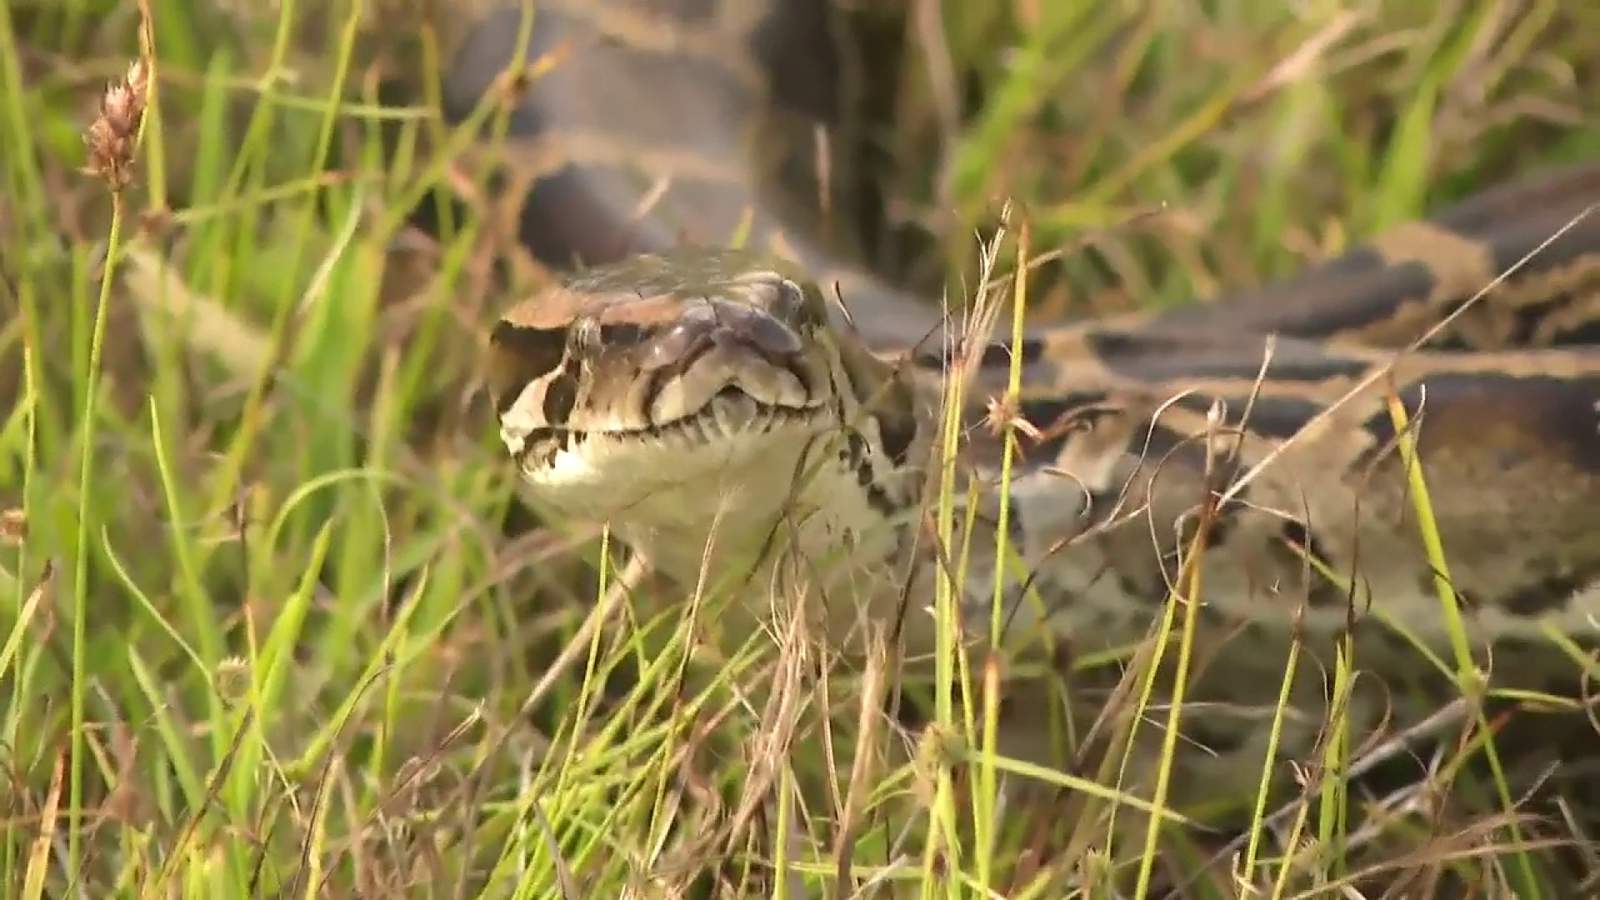 Florida FWC votes to ban ‘high-risk’ reptiles as snake lovers protest and beg for mercy